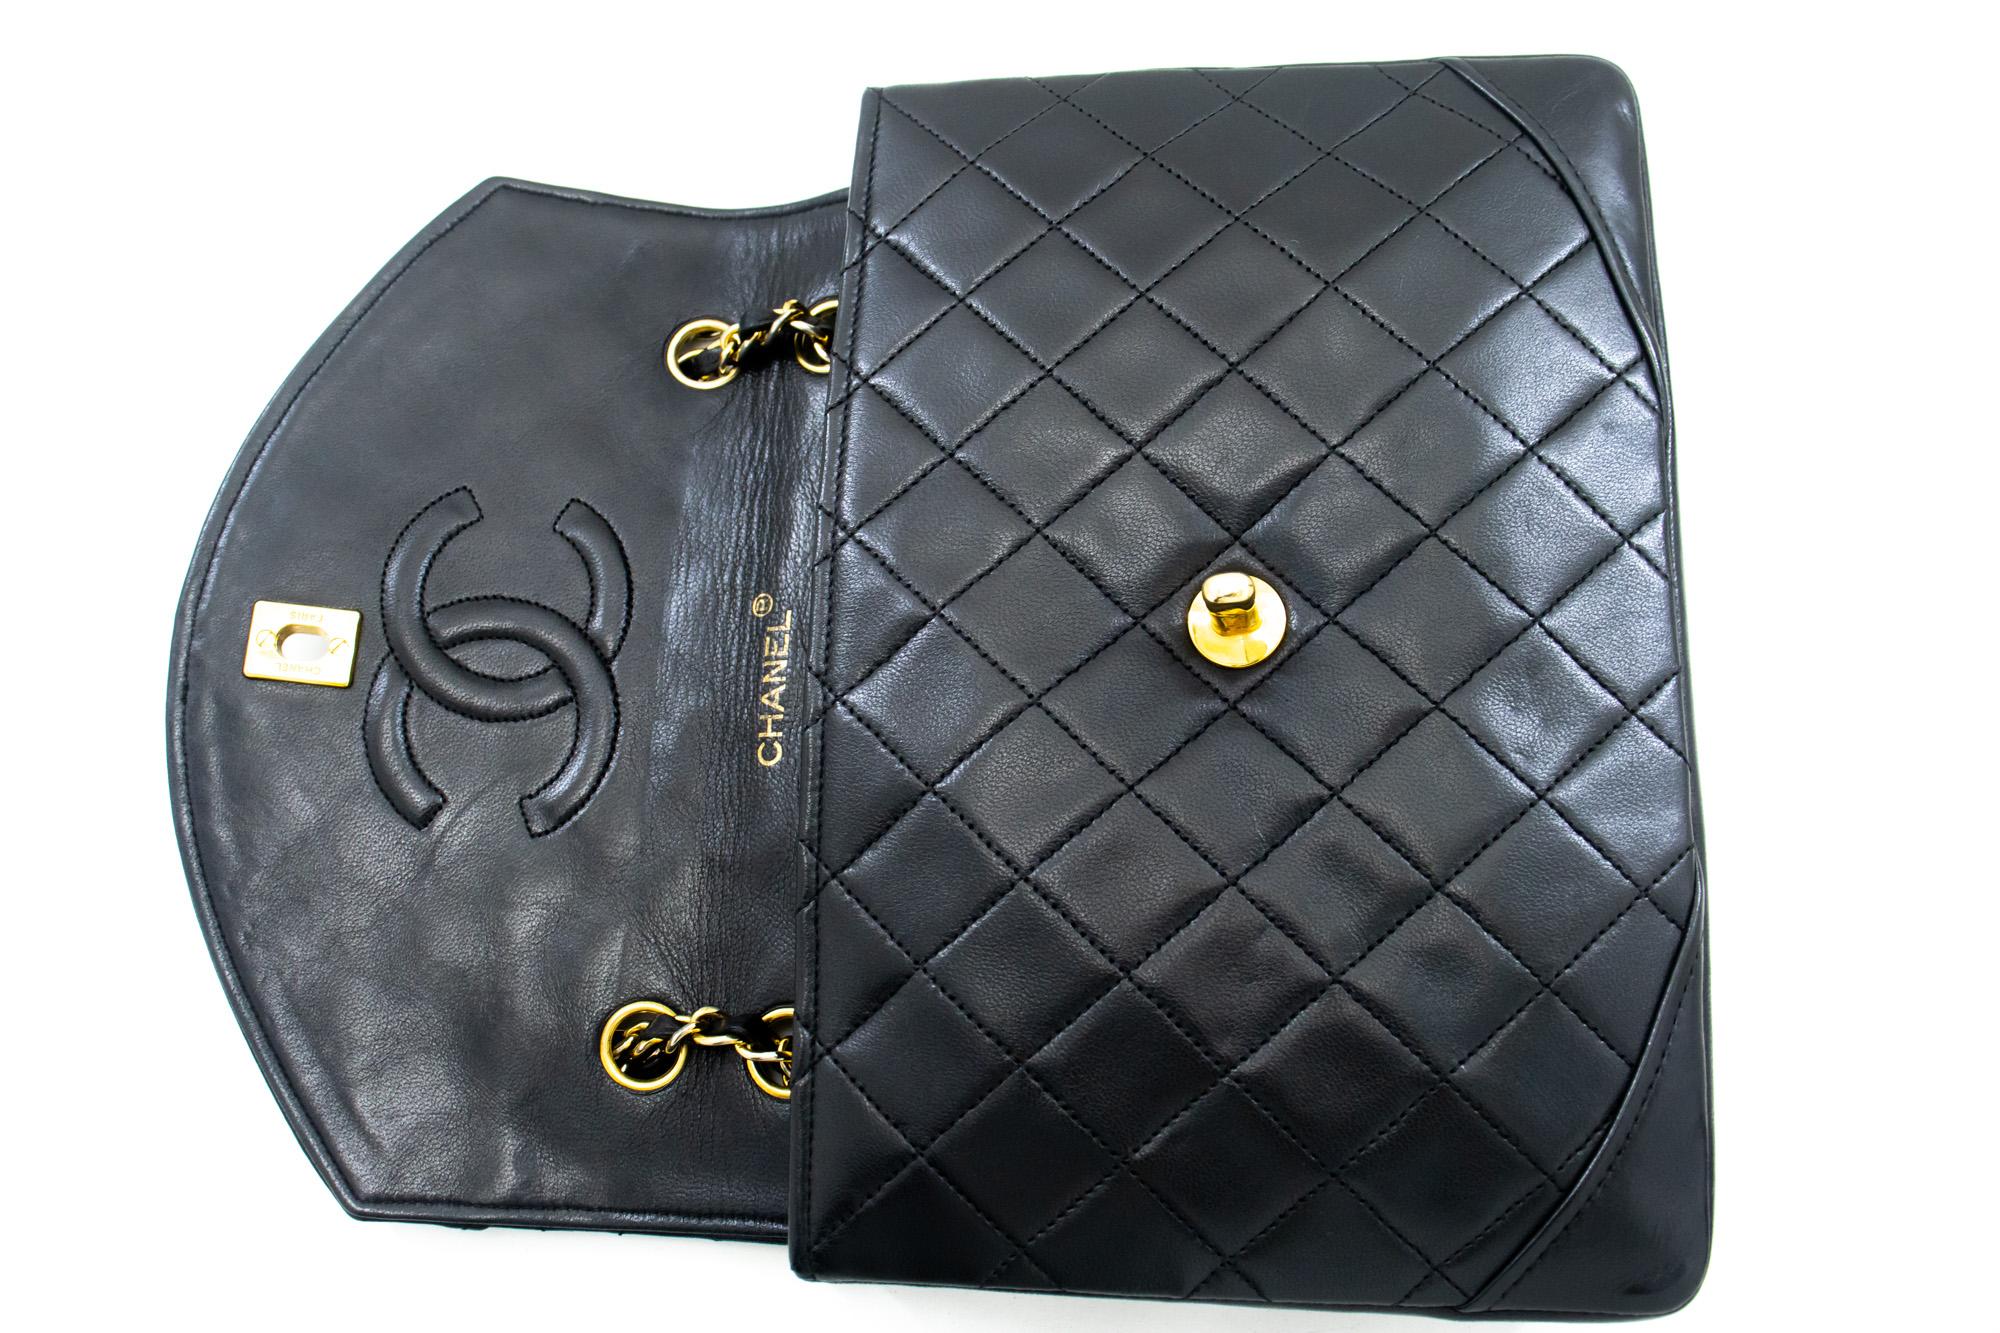 CHANEL Half Moon Chain Shoulder Crossbody Bag Black Flap Quilted For Sale 6